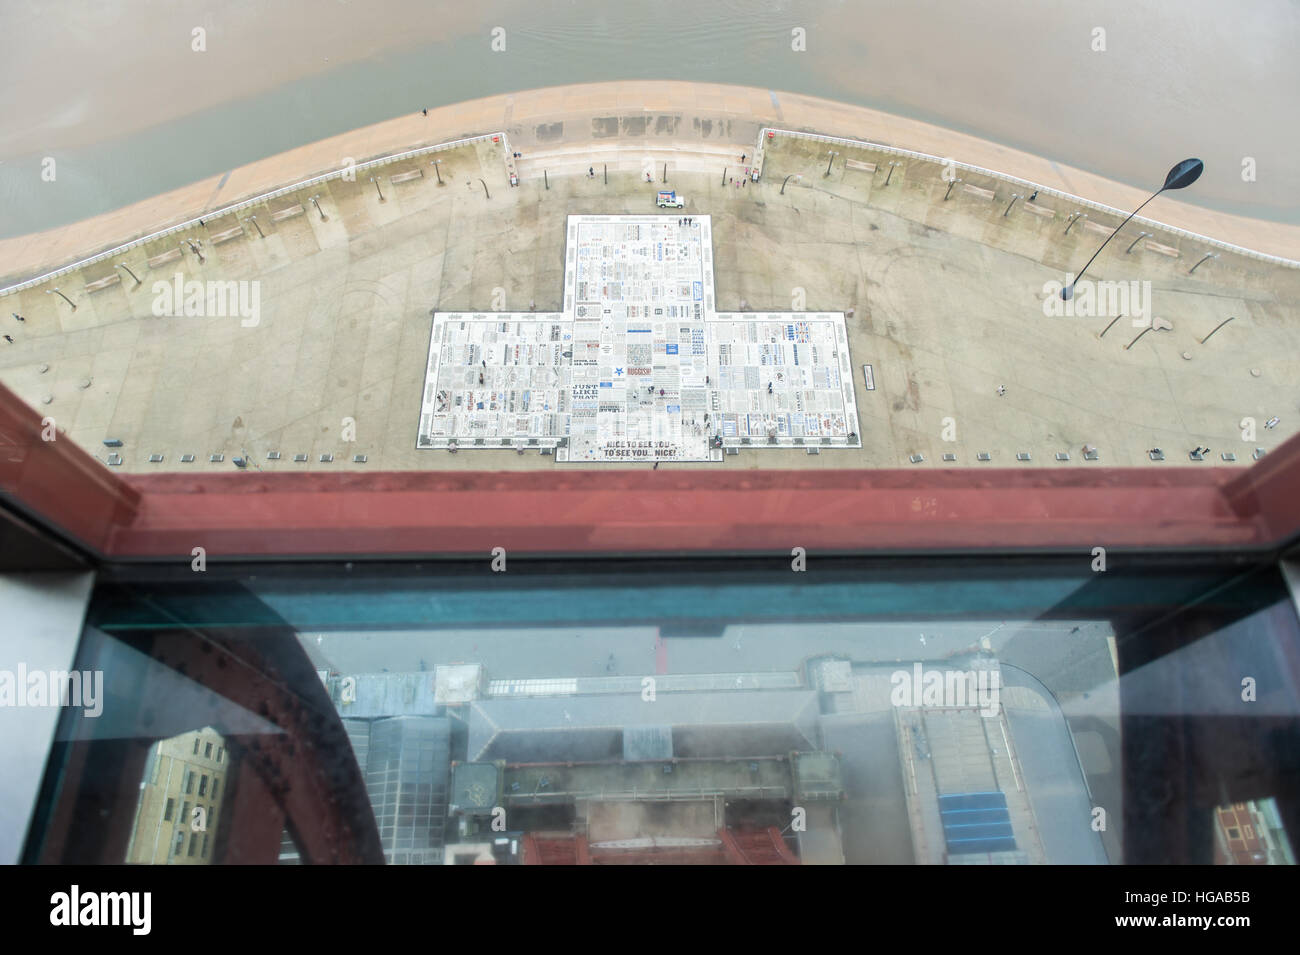 The Blackpool Comedy Carpet as viewed from the top of the Blackpool Tower, Lancashire, United Kingdom. Stock Photo